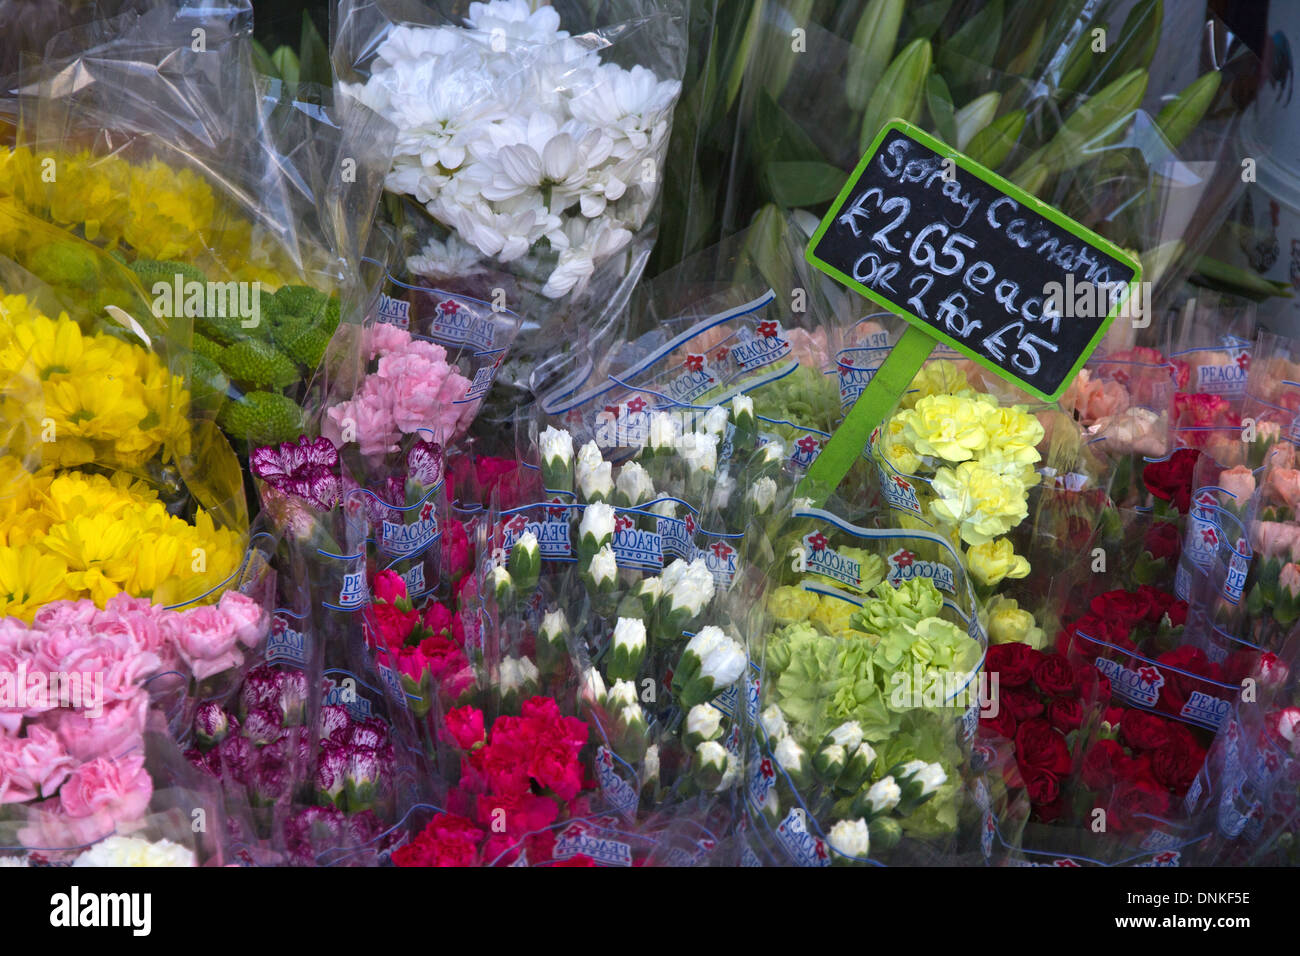 Bunches of flowers for sale Stock Photo